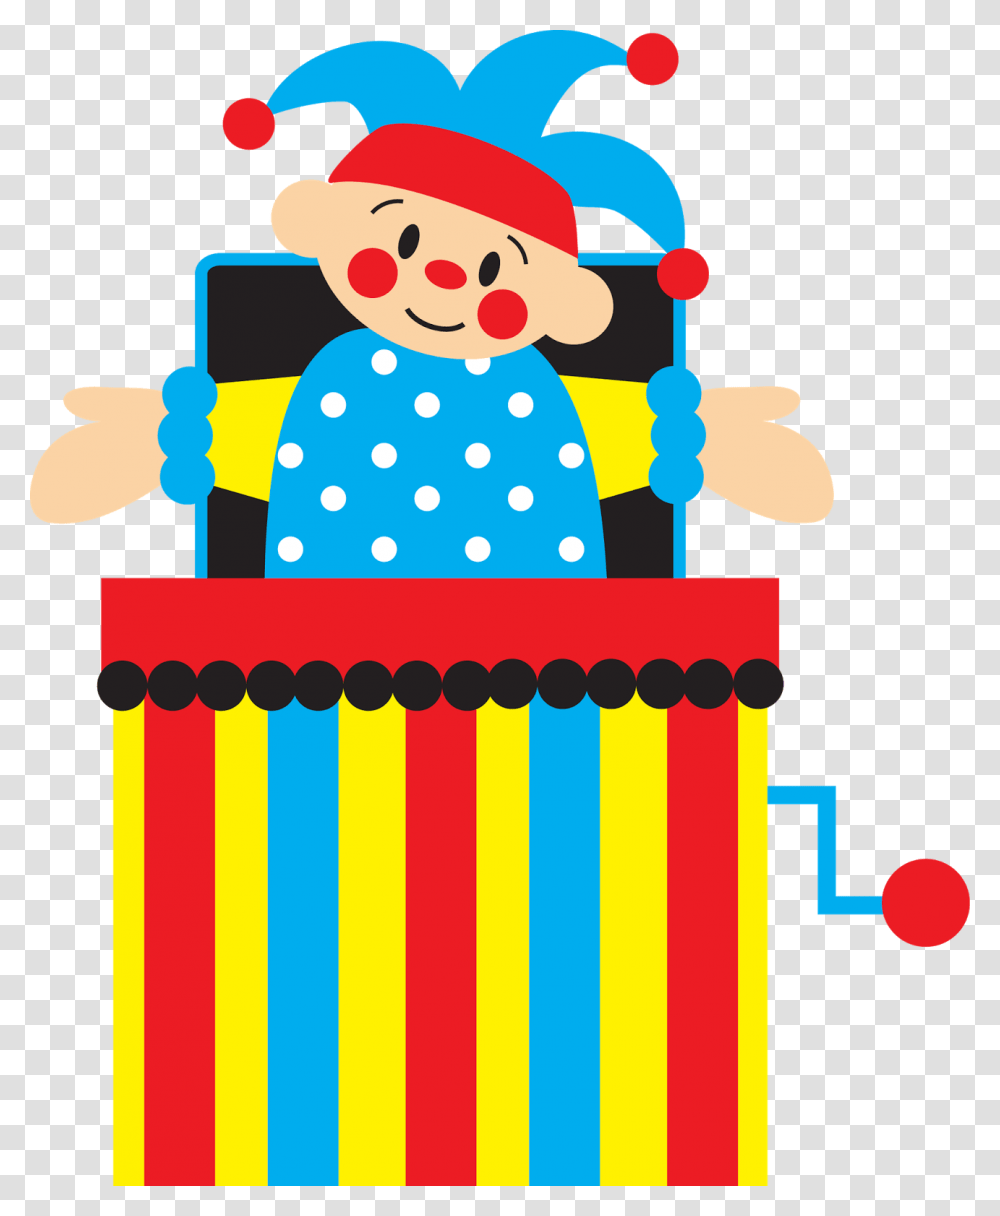 Vintage Toys Clip Art Clipart Of Toy Wagon, Texture, Polka Dot, Face Transparent Png